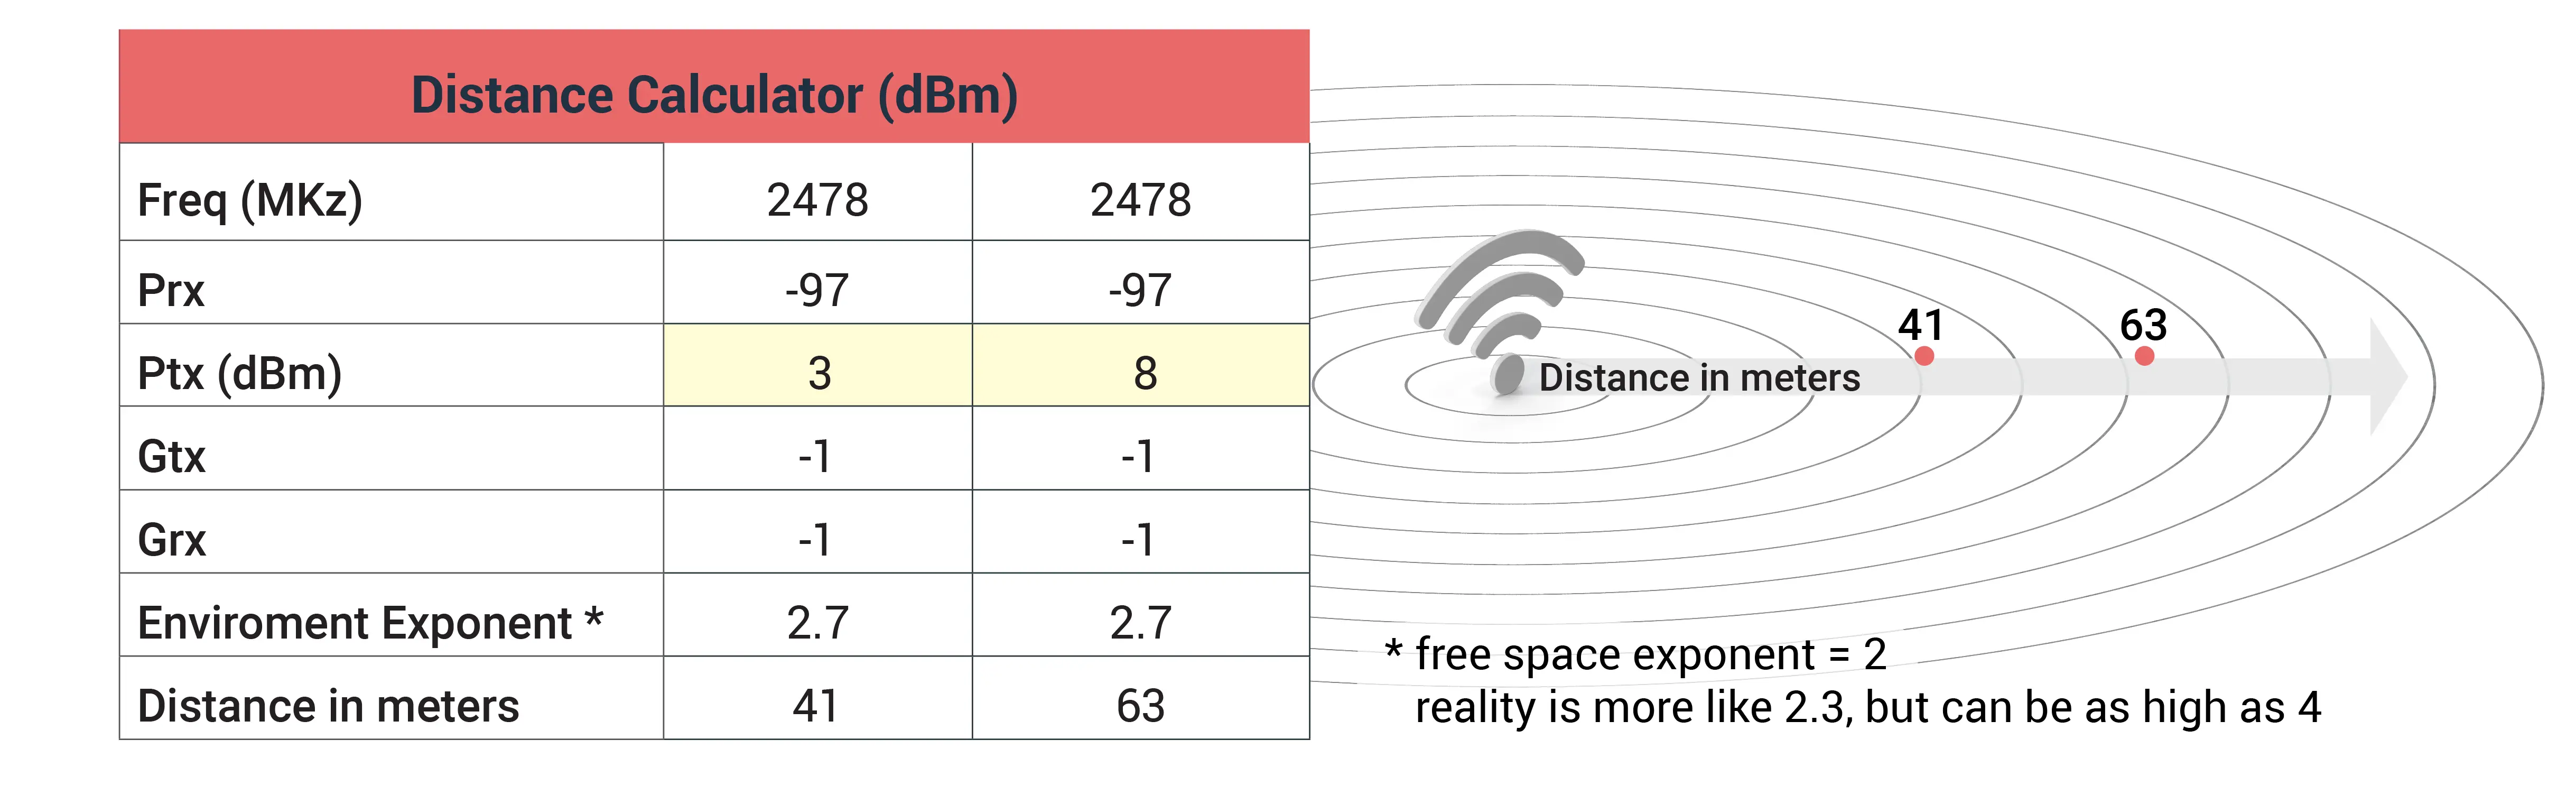 Distance calculation table shows how a stronger Bluetooth transmitter can increase Bluetooth range